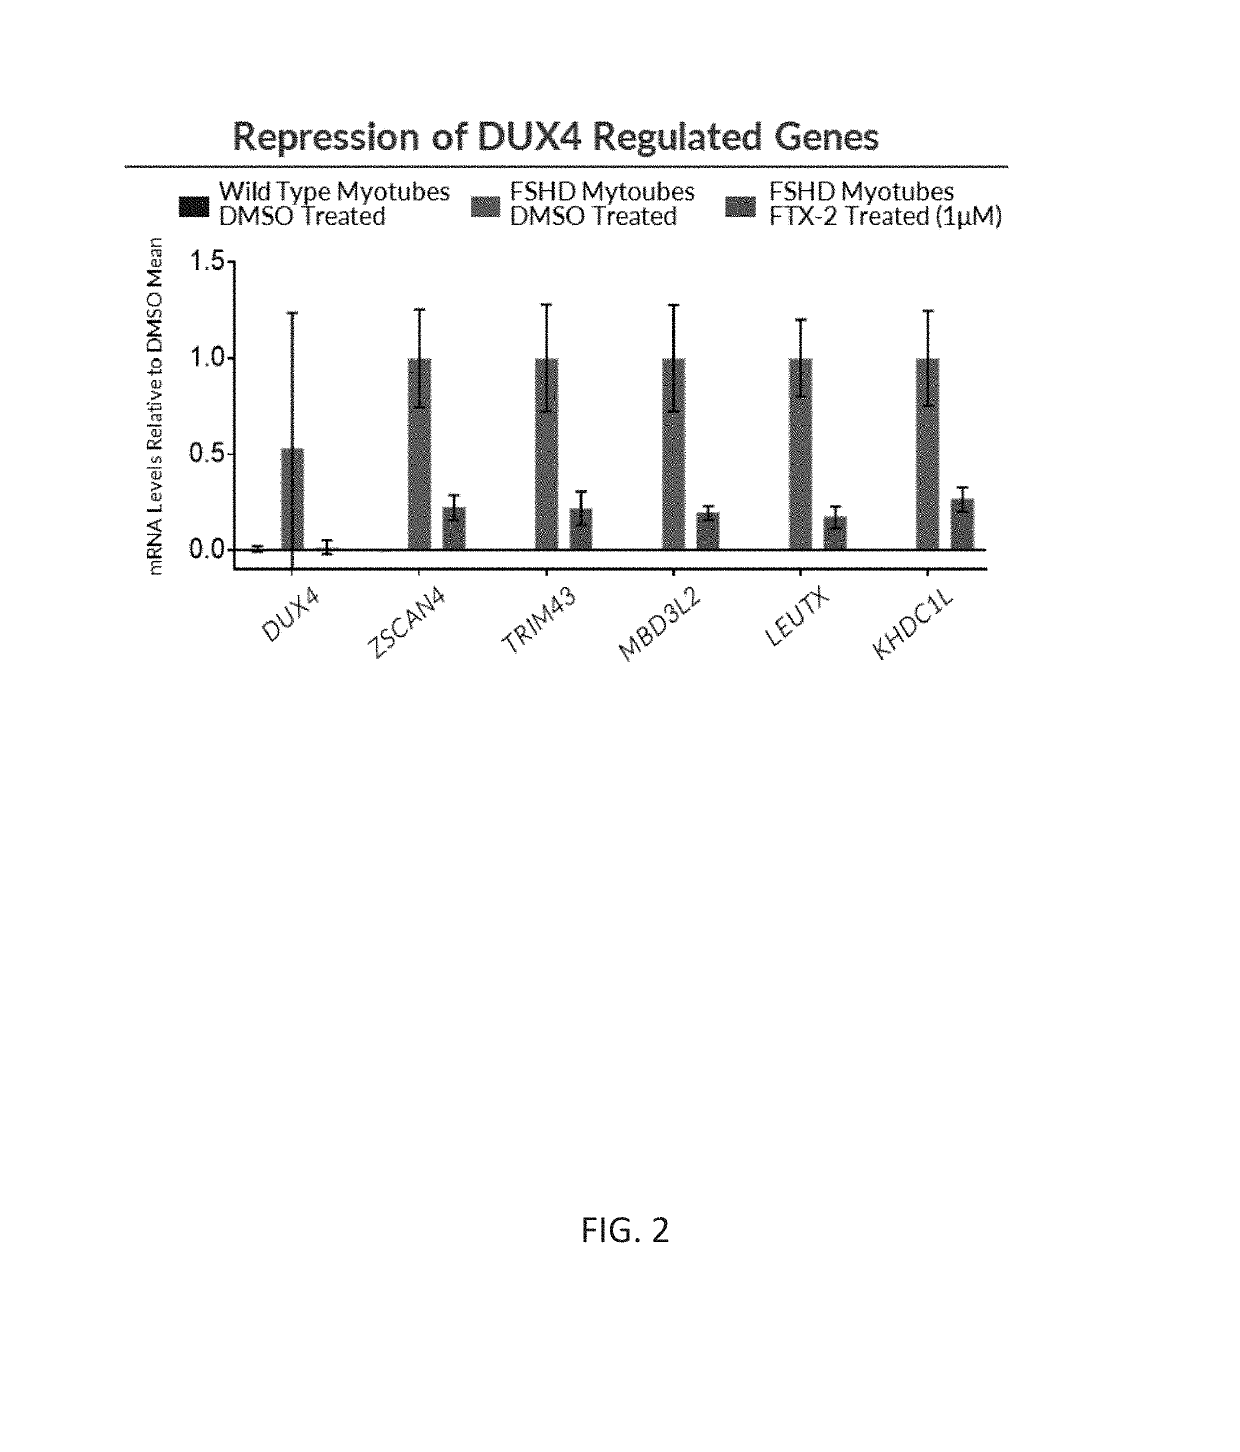 P38 kinase inhibitors reduce dux4 and downstream gene expression for the treatment of fshd